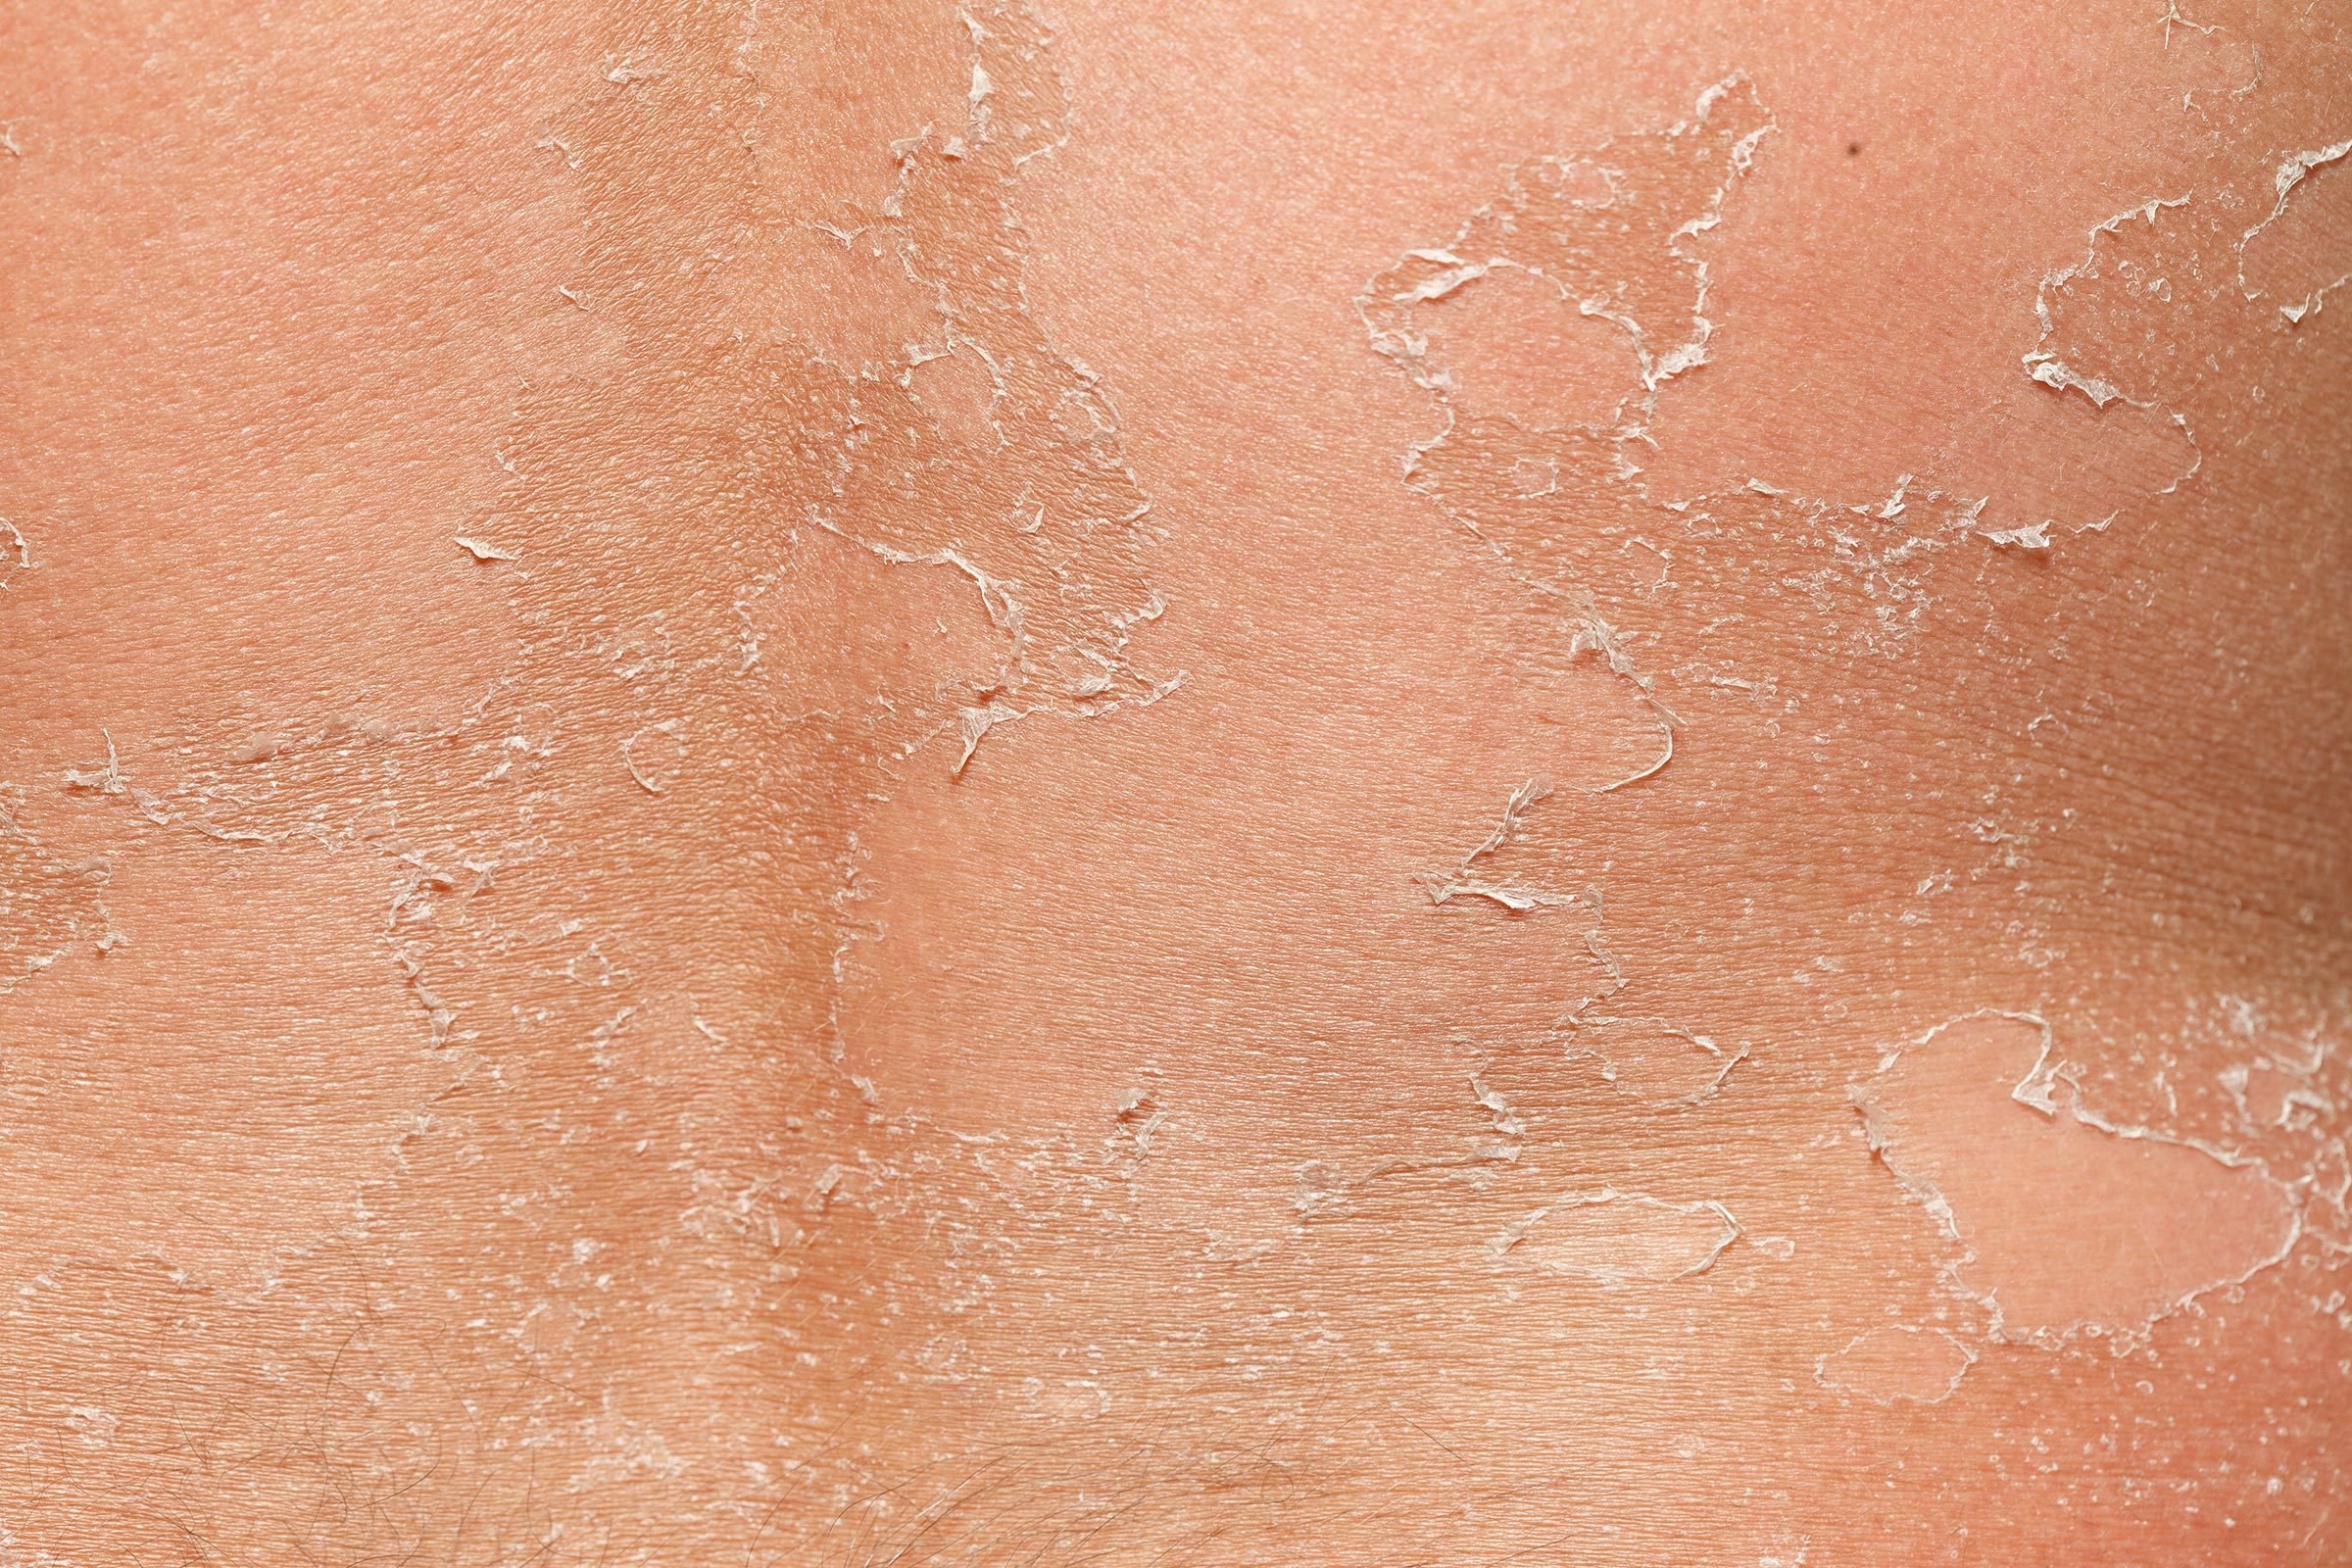 Skin Peeling: What Your Peeling Skin Wants to Tell You | The Healthy